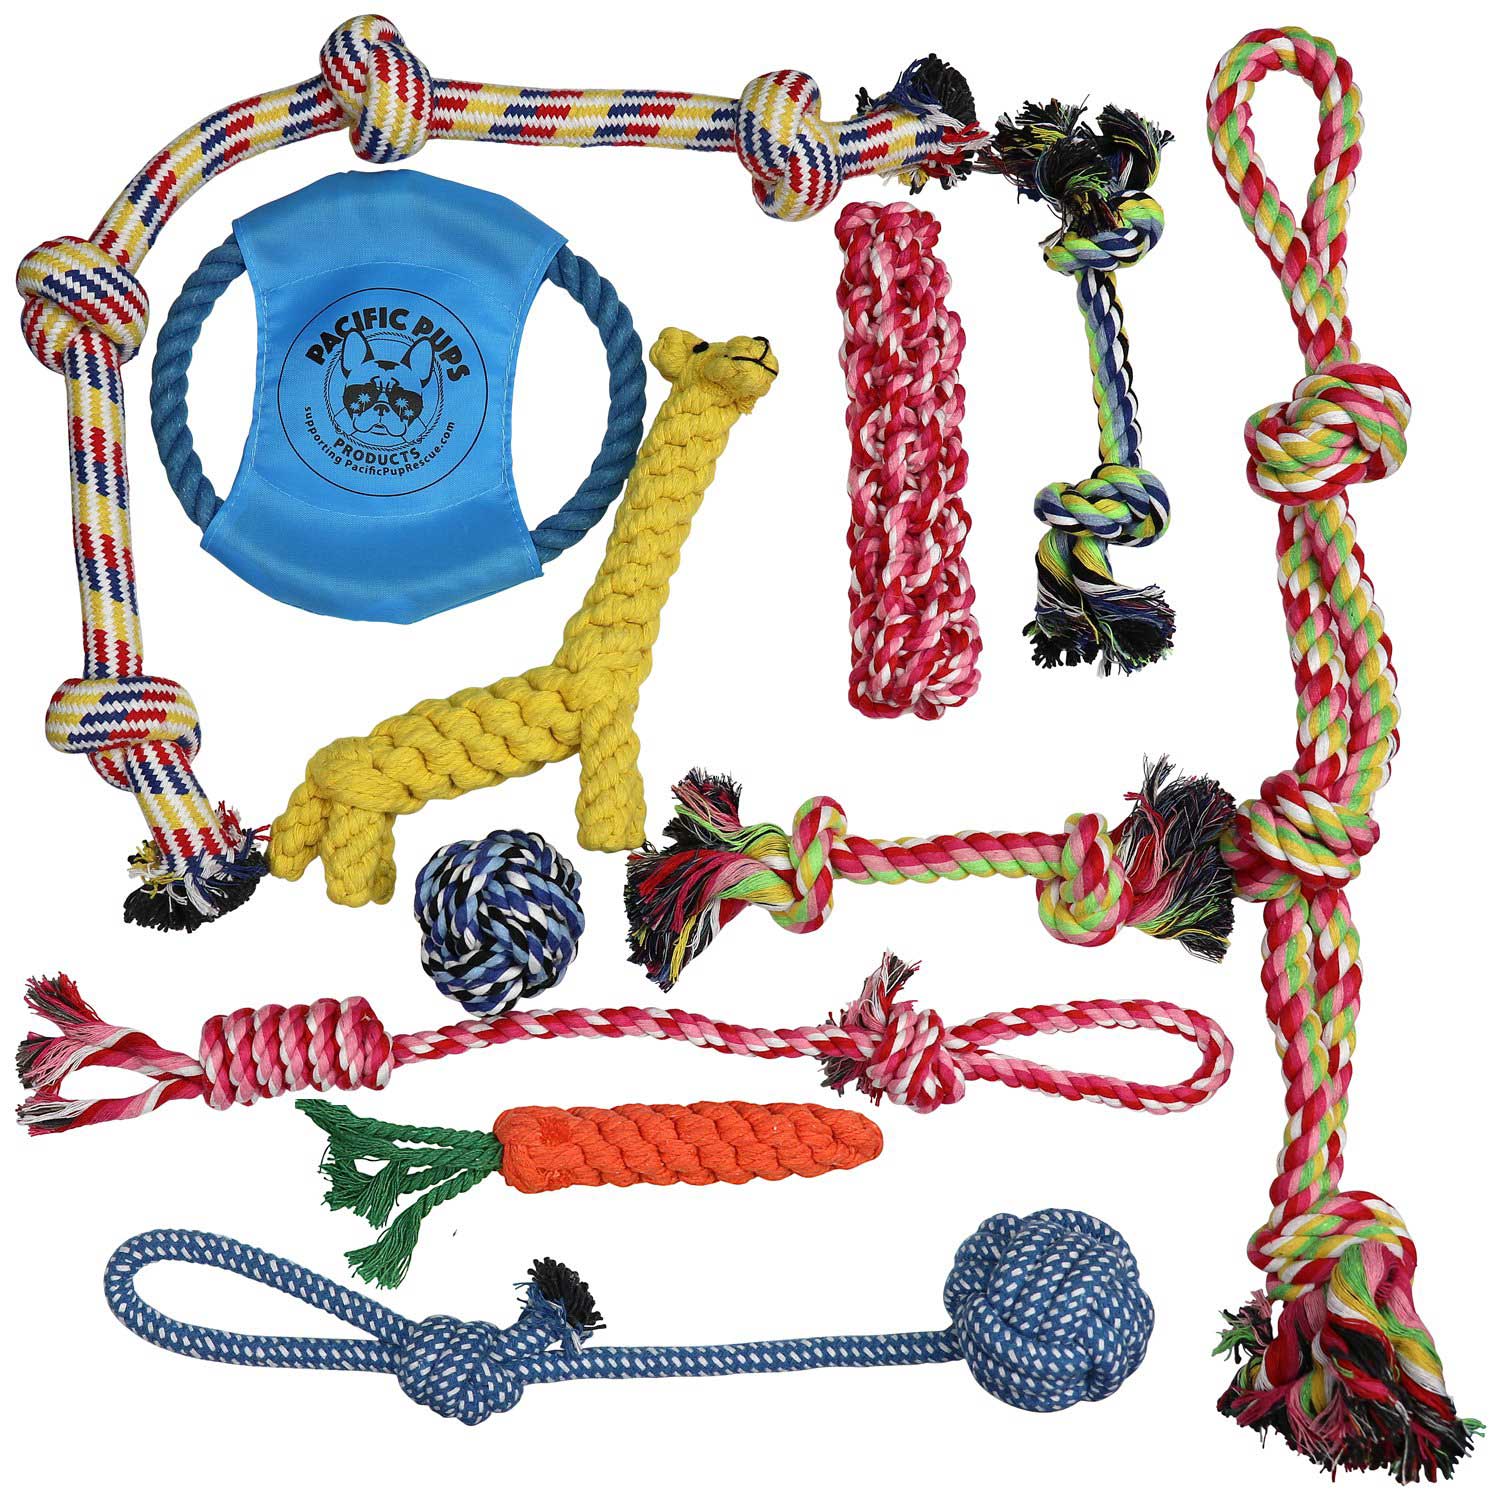 Pacific Pups Products Set Of 11 Nearly Indestructible Dog Toys